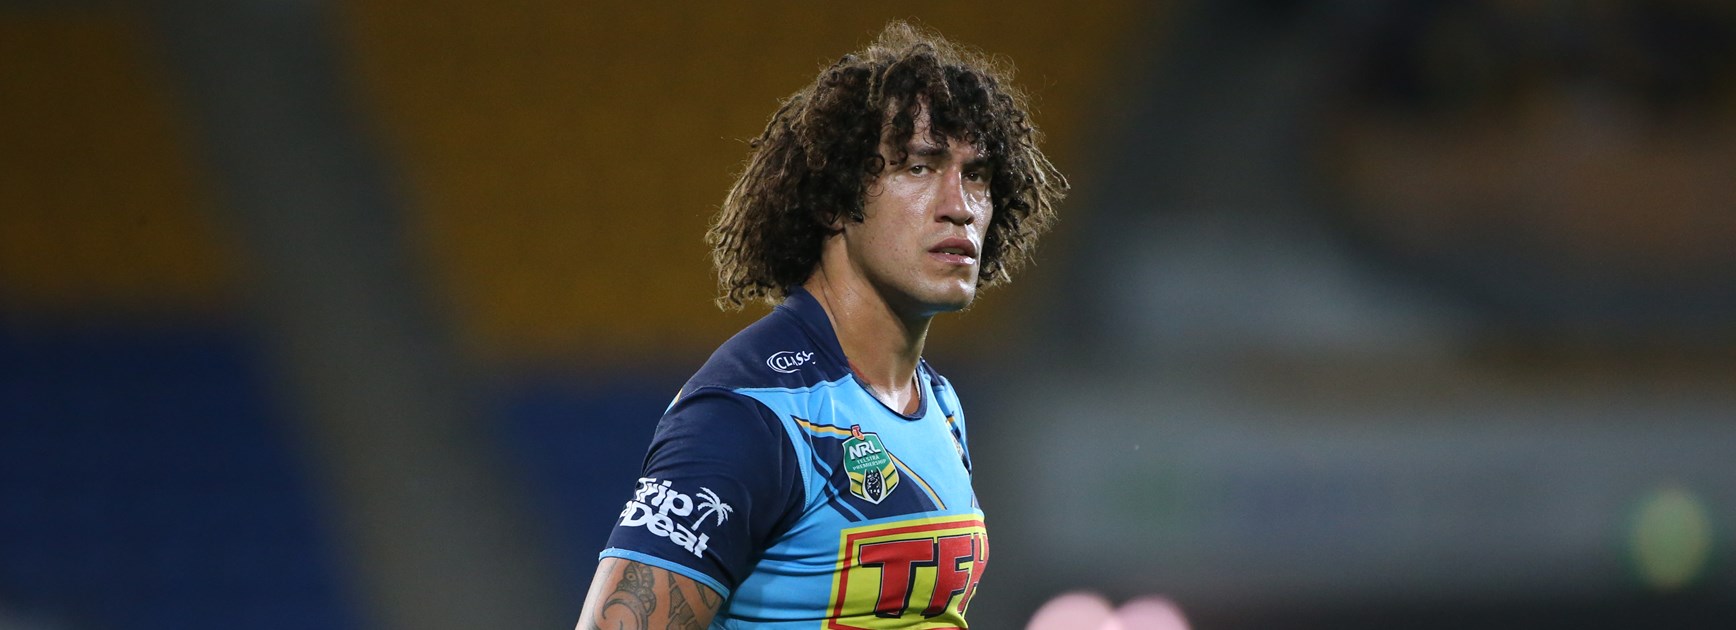 Gold Coast's Kevin Proctor.